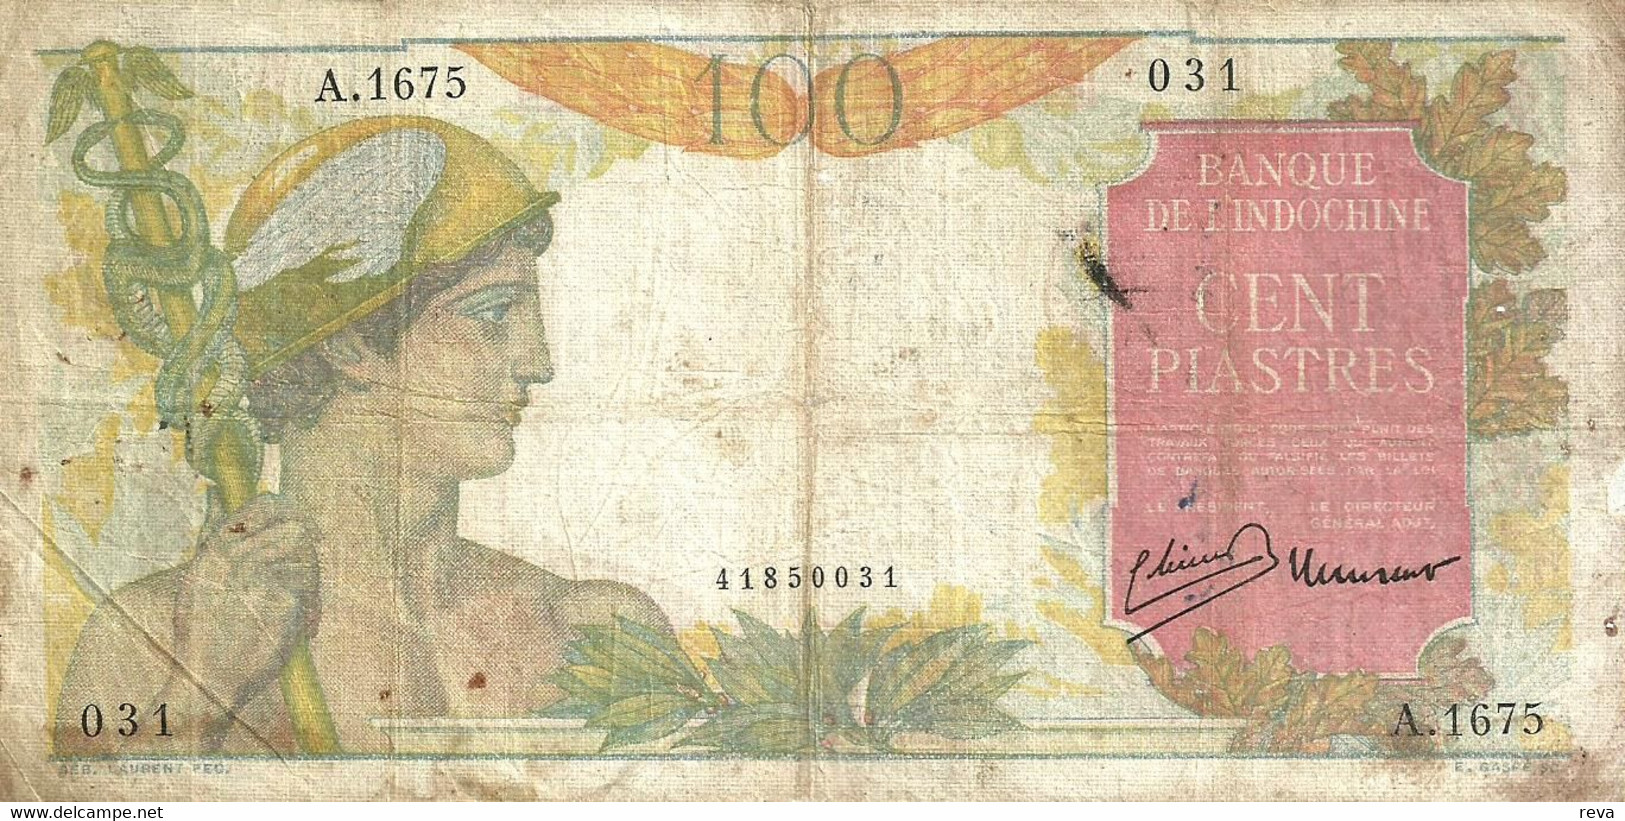 INDOCHINE FRANCAISE 100 PIASTRES RED WOMAN  FRONT  ELEPHANT ANIMAL & MAN BACK ND(1947) P82 F READ DESCRIPTION - Andere - Azië